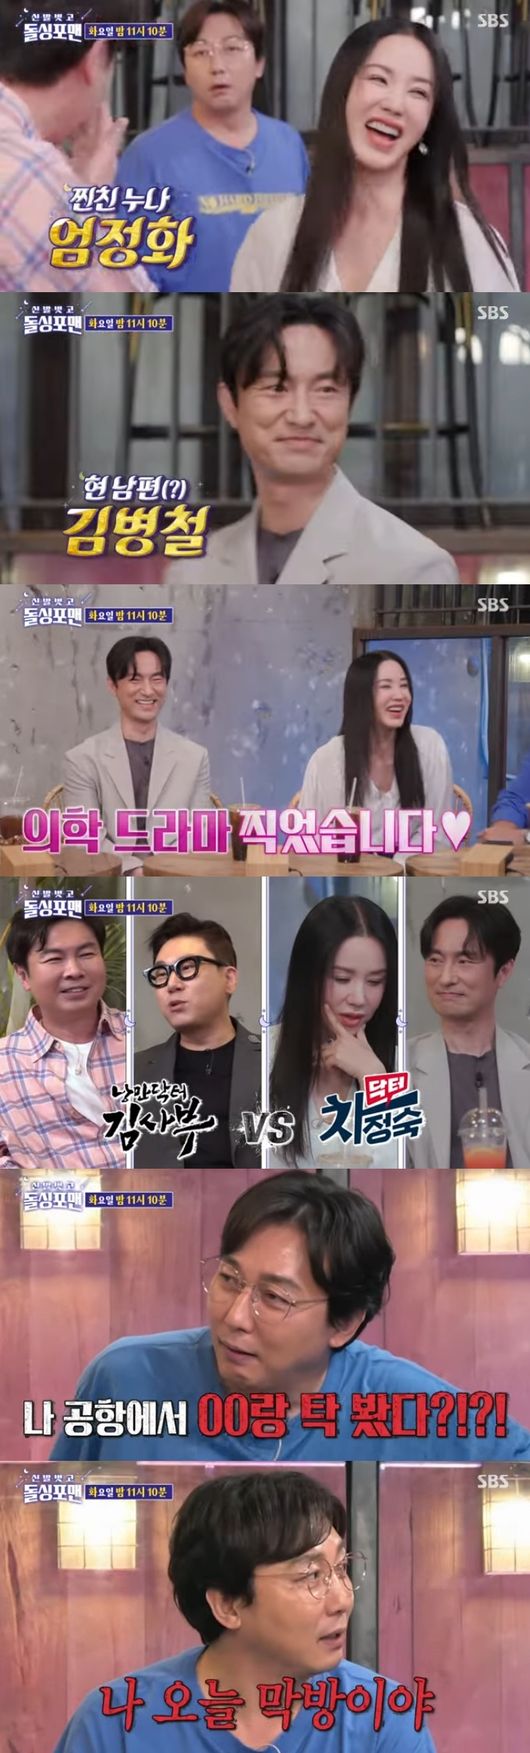 Singer and actor Uhm Jung-hwa appears on Dollsing4menAt the end of the SBS Dollsing4men broadcast on the 4th, trailers were released next week.Uhm Jung-hwa greeted Im Won-hee with a warm greeting, and Lee Sang-min said, What are you two?I sent a suspicious eye.Tak Jae-hun pointed to Kim Byeong-cheol, saying, Who is this? Is this your husband? Uhm Jung-hwa said, This is our husband.Not a good husband, he replied frankly.After that, Tak Jae-hun said, Go if you want to promote the drama, and Uhm Jung-hwa laughed, saying, I came out to promote the drama.Meanwhile, Lee Sang-min said, Can I talk about this?When I called my sister pupils, my runny nose continued to come out. Tak Jae-hun said, When I went back to the camera, In particular, Uhm Jung-hwa said, Thats right. I saw Tak Jae-hun at the airport on my way to Hawaii before. Tak Jae-hun embarrassed Tak Jae-hun by taking out a witness that he was at the airport with someone.He said, Youve said hello at the airport, and Tak Jae-hun laughed, saying, Im in a hurry today.Lee Sang-min of the video Lee Sang-min said, It is Kim Byeong-cheols life banance. He suggested the option of Doctor Cha Jung-sook vs. Beer advertising exclusive contract and Kim Byeong-cheol said, Beer advertising seems to be better.I want to take an advertisement like that. Meanwhile, Dollsing4men is broadcast every Tuesday at 11:10 pm.SBS